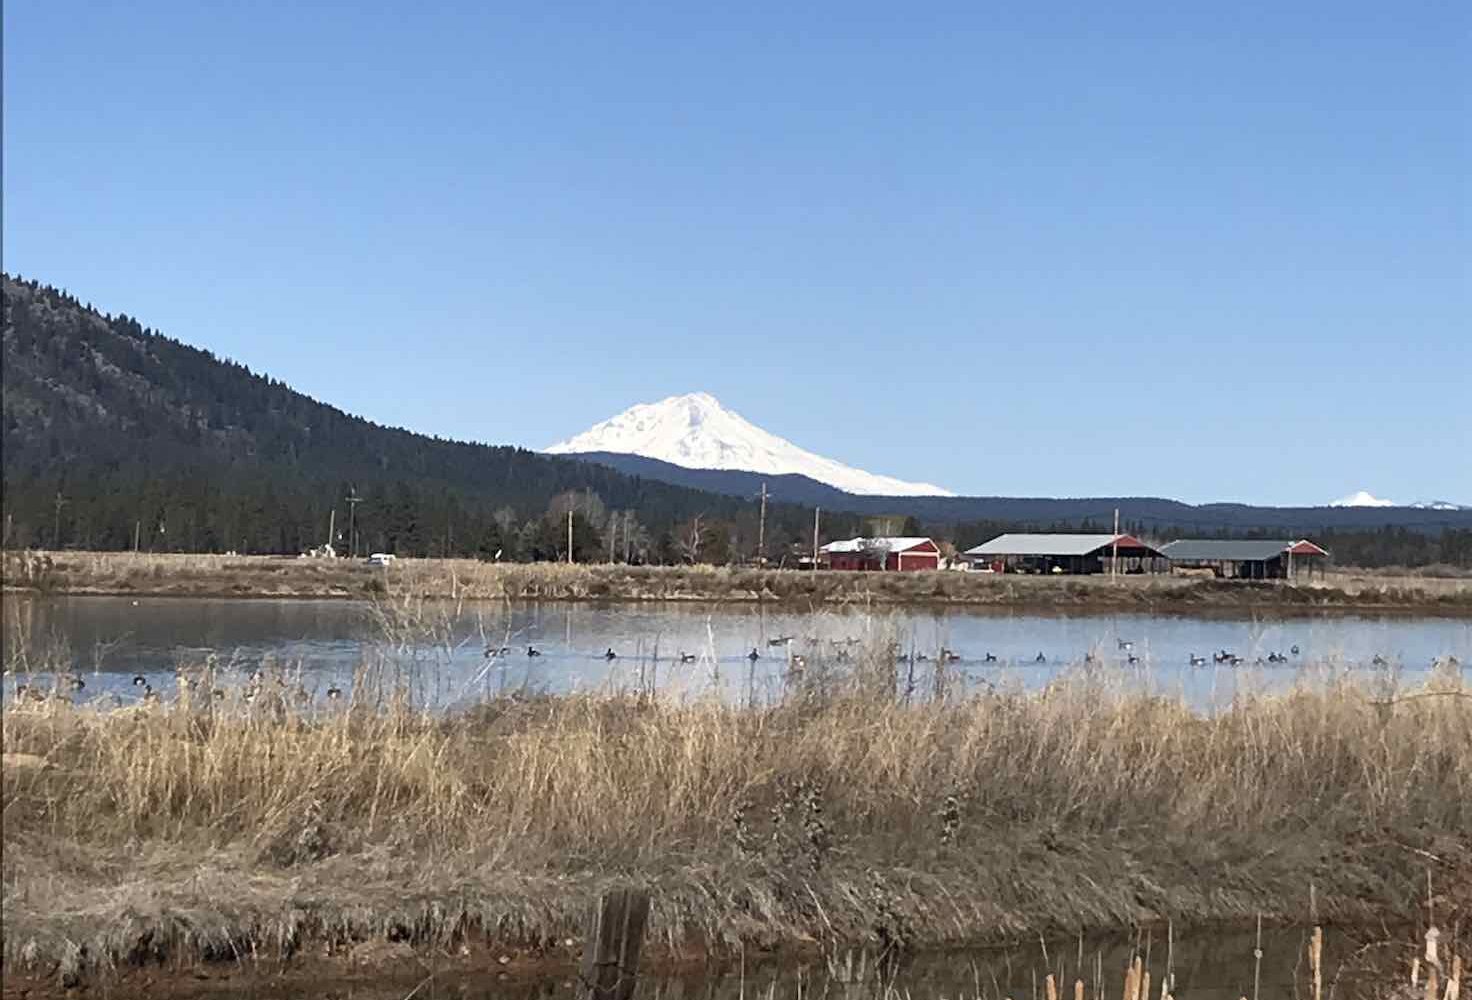 Gravel cycling route with Mt Shasta in the view